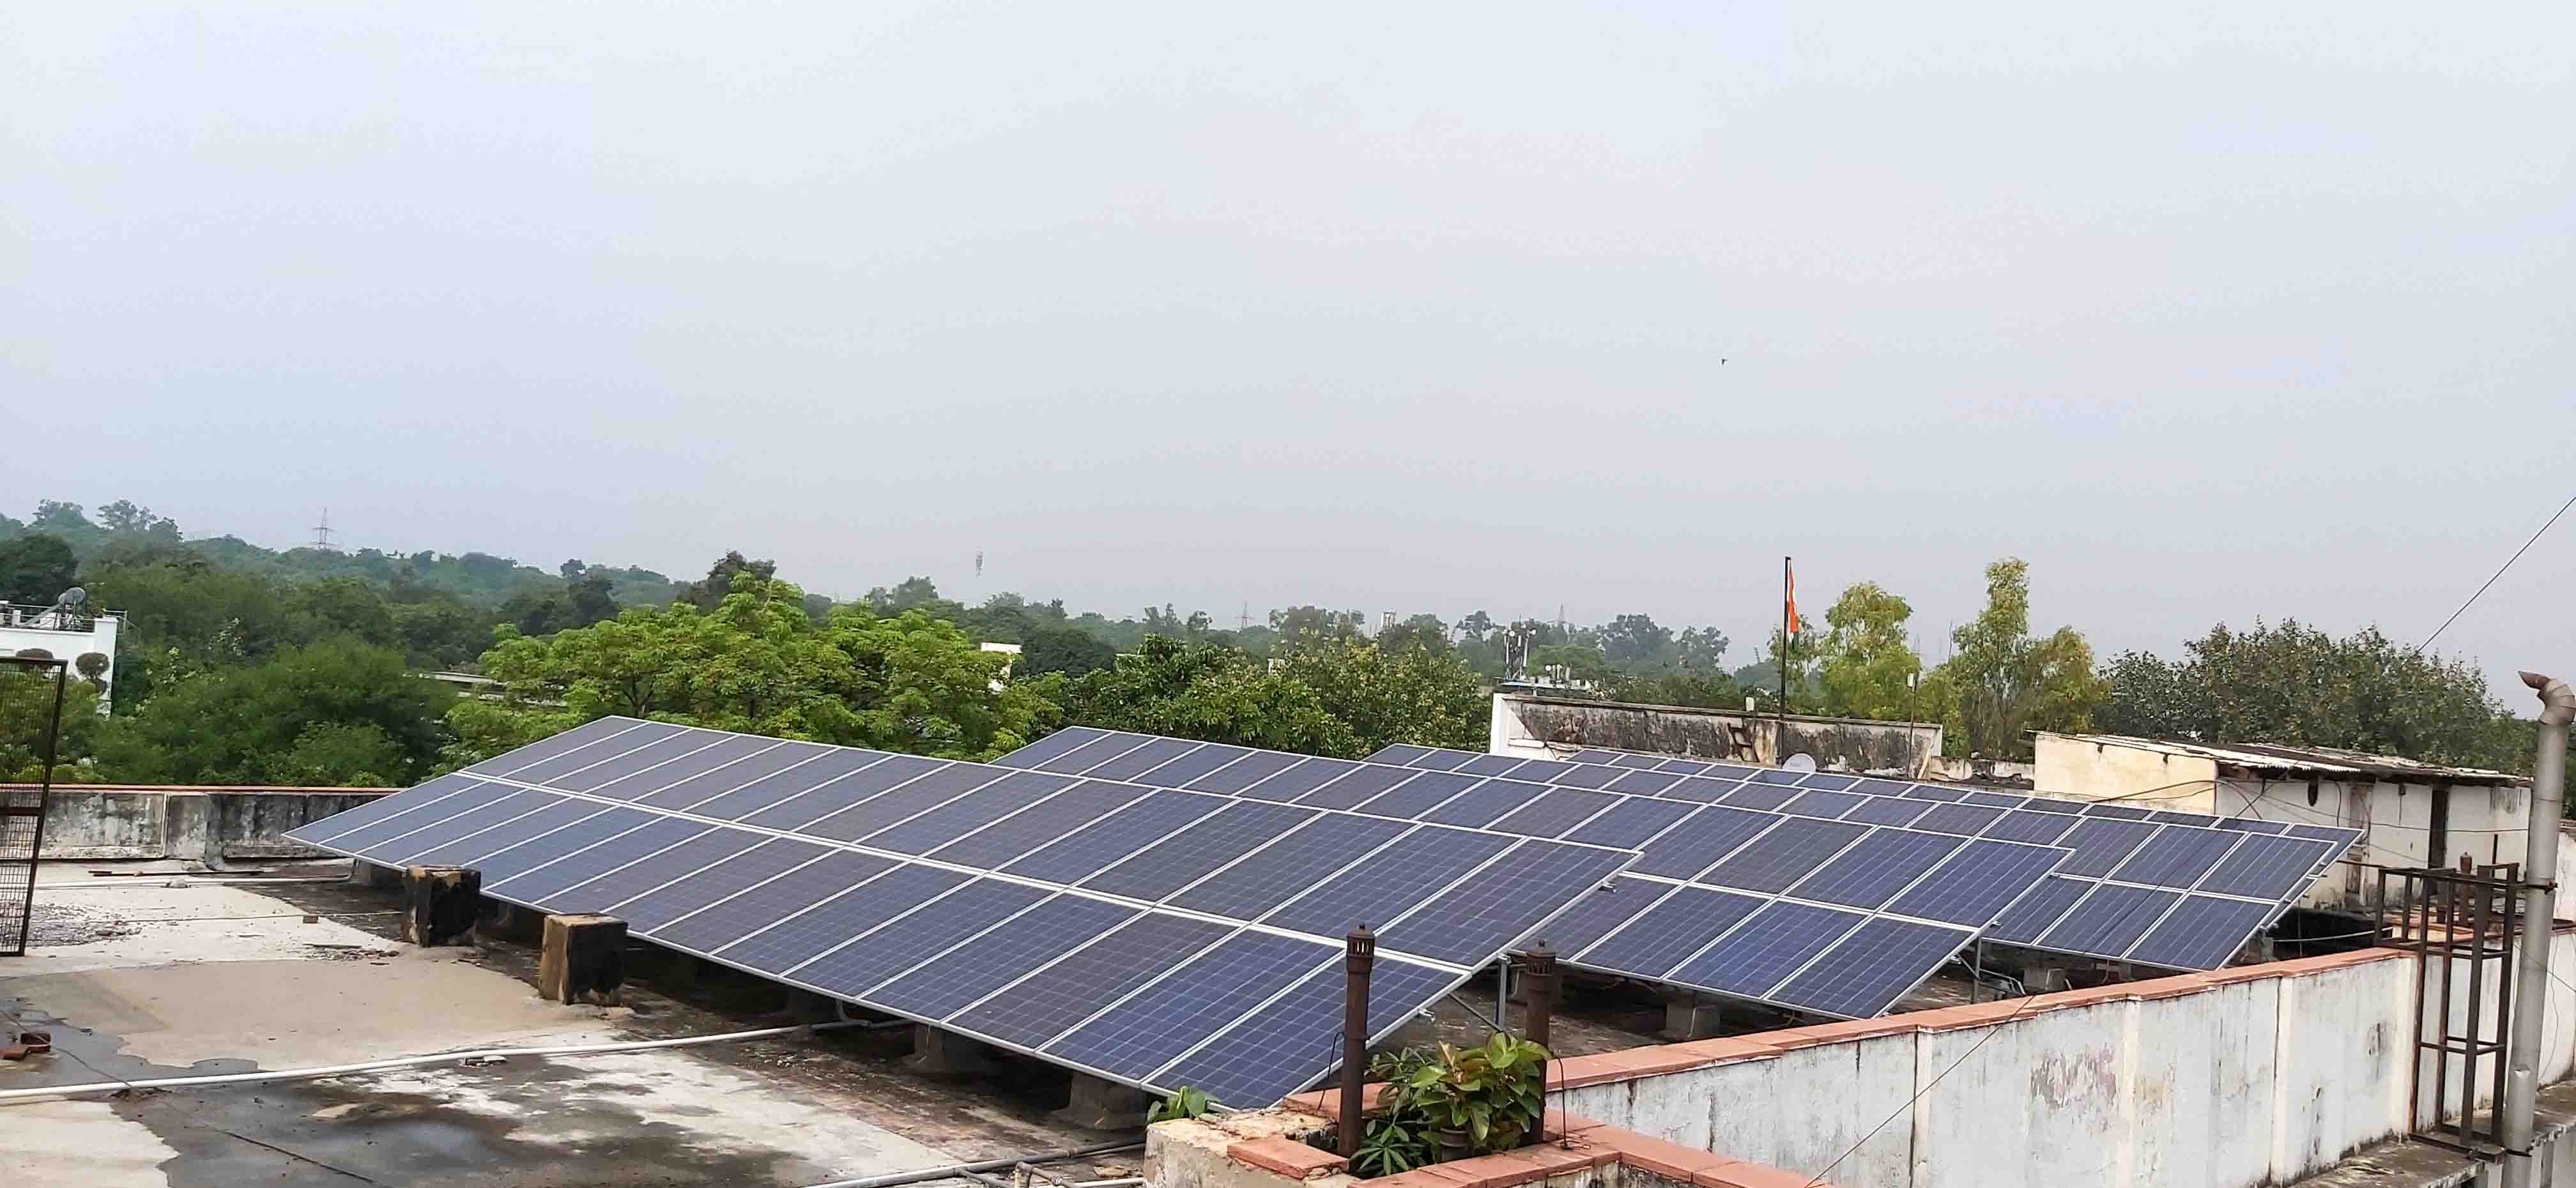 On-Grid Solar Rooftop System, Department of Post, New Delhi